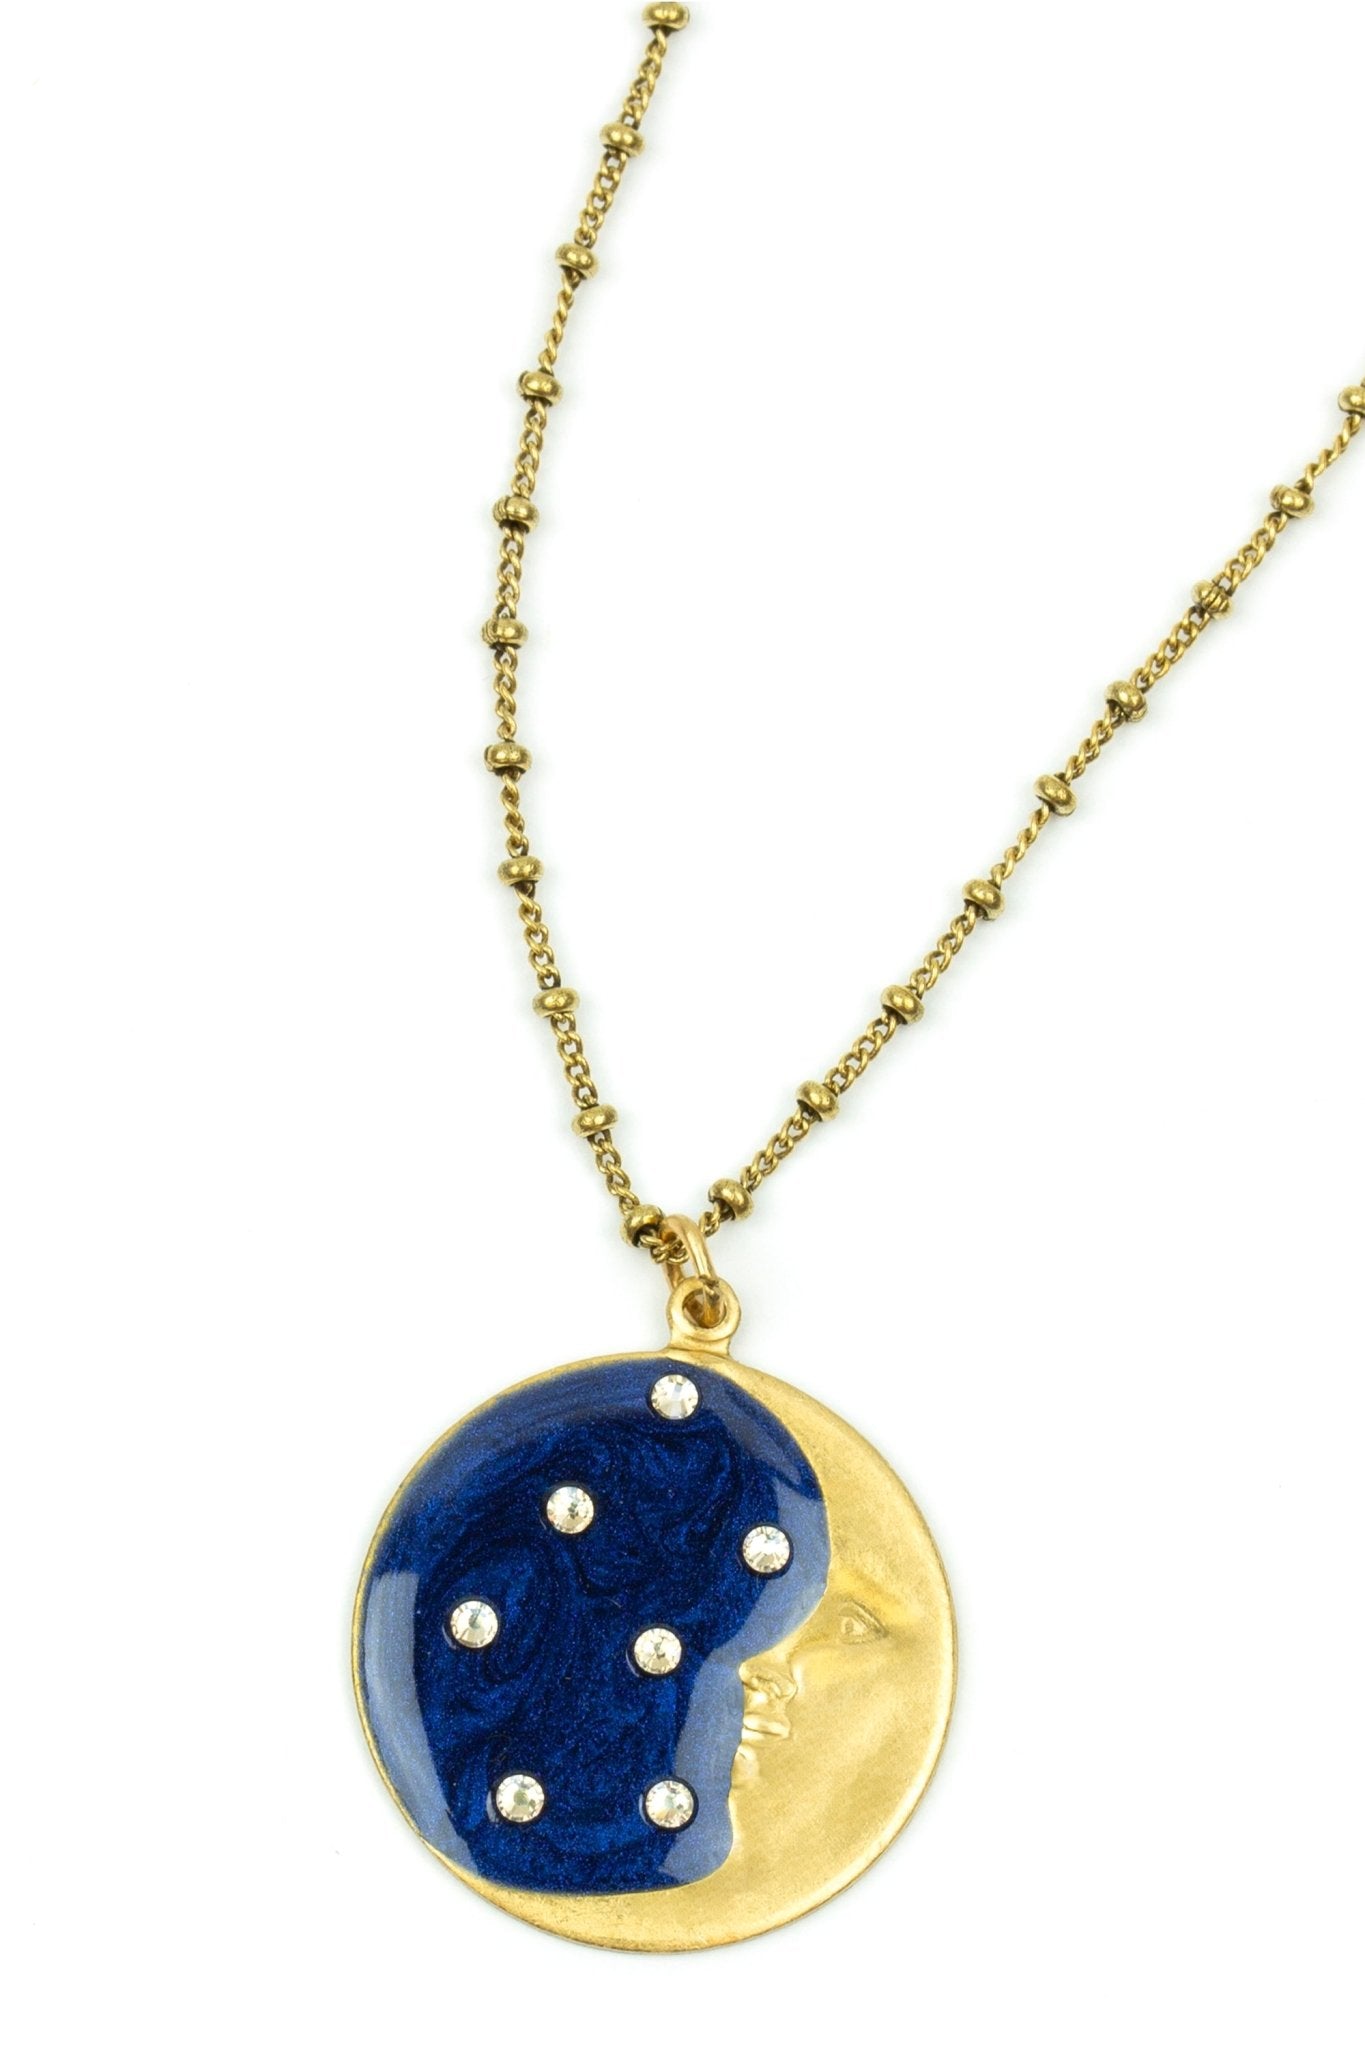 Man in the Moon Necklace - DressbarnNecklaces